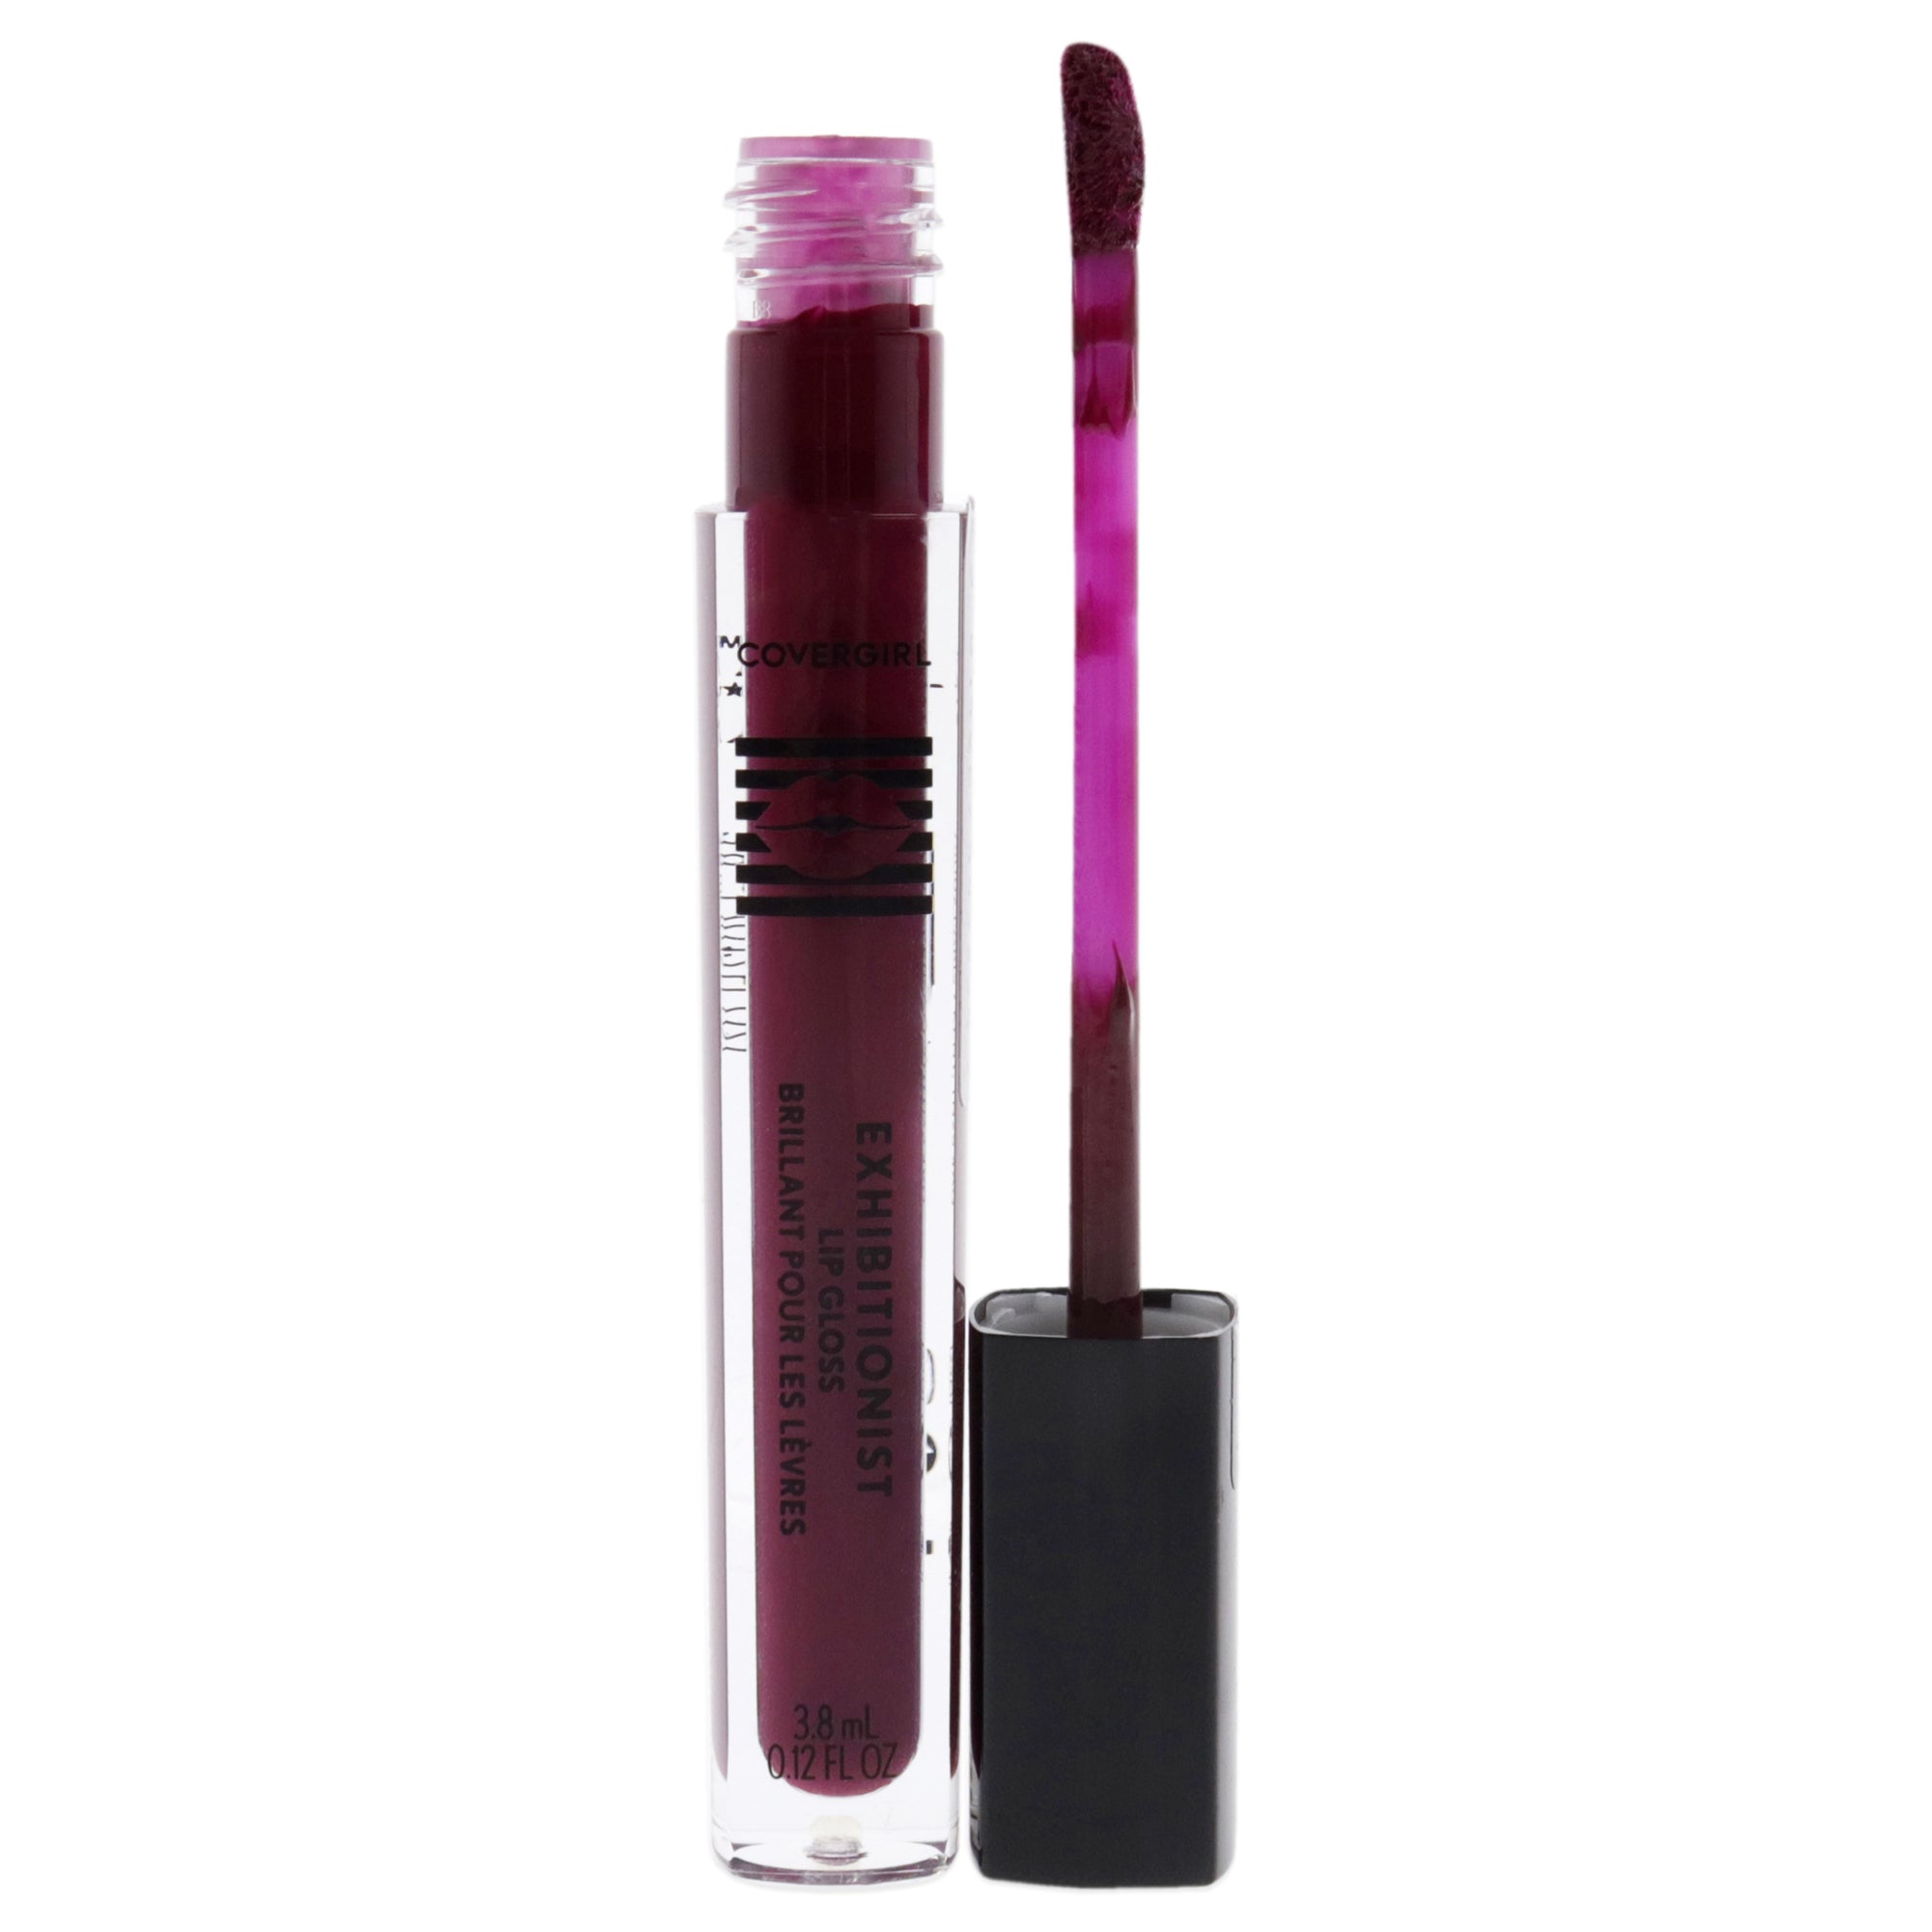 CoverGirl Exhibitionist Lipgloss - 220 Adulting For Women 0.12 oz Lip Gloss